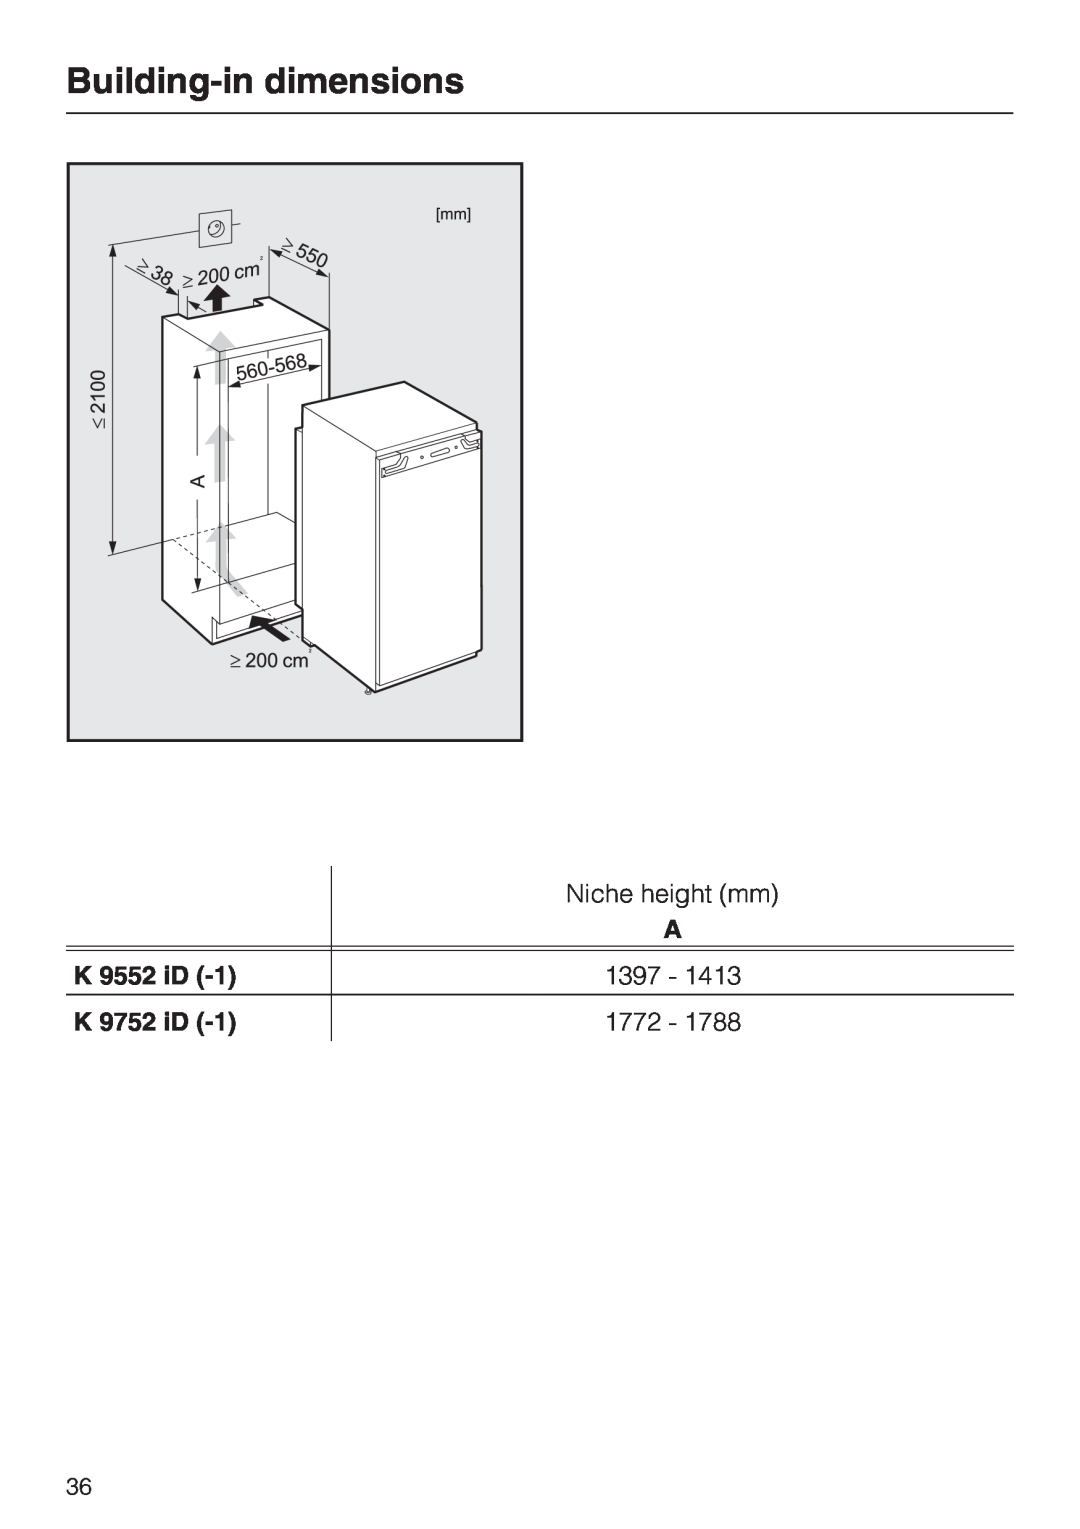 Miele K9752, K9552 installation instructions Building-indimensions, Niche height mm, K 9552 iD, 1397, K 9752 iD, 1772 